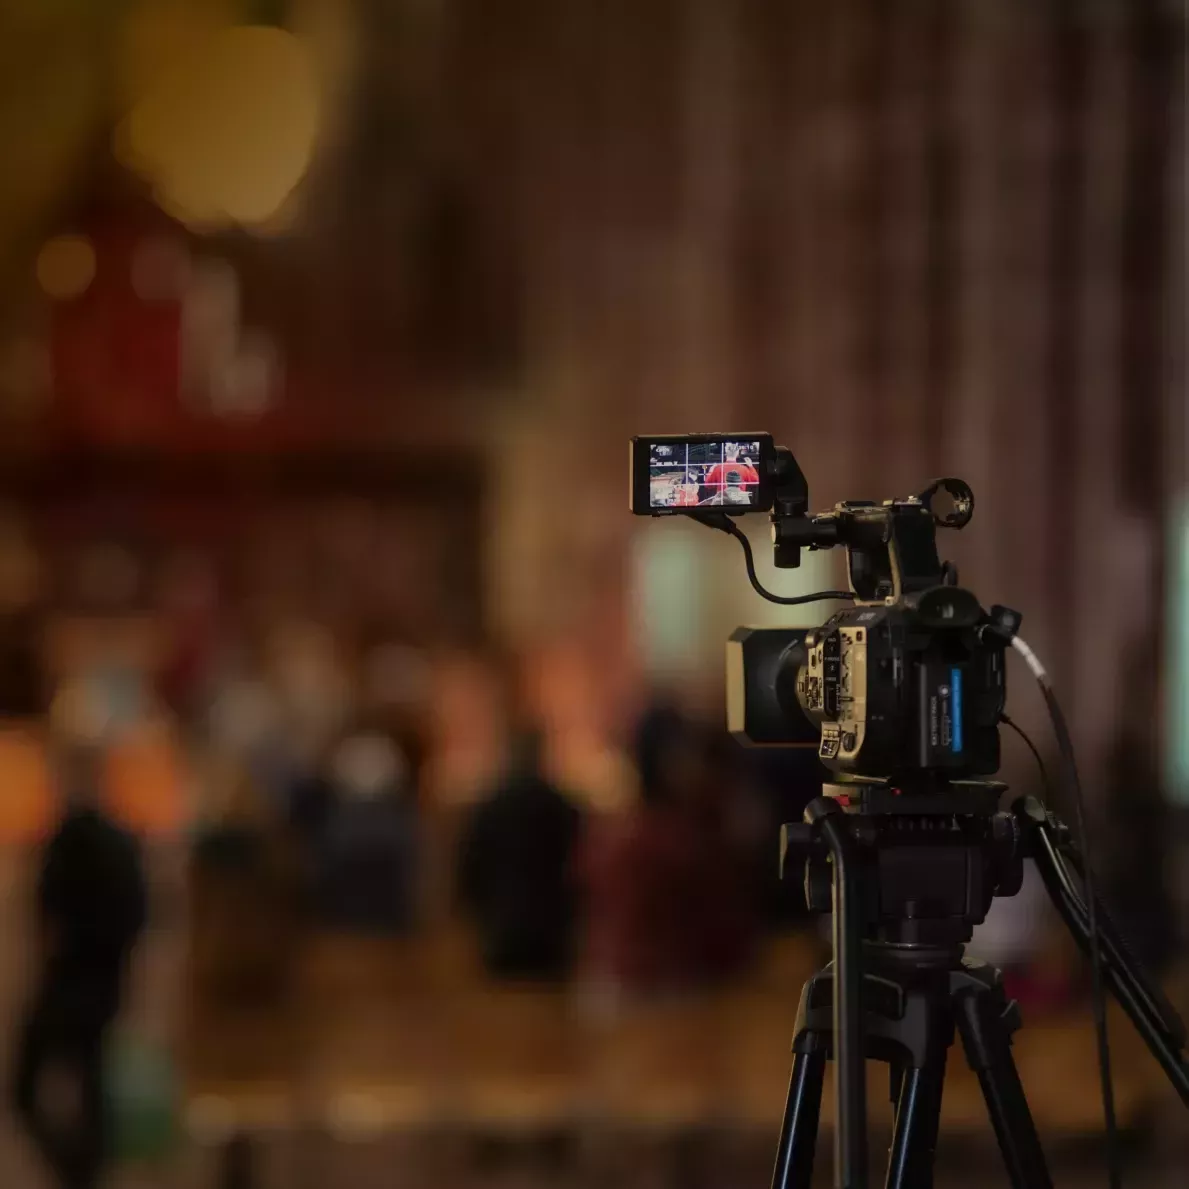 Photograph showing a video camera filming a service. The photo is taken with short depth of field with the camera in focus and the rest of the scene out of focus.